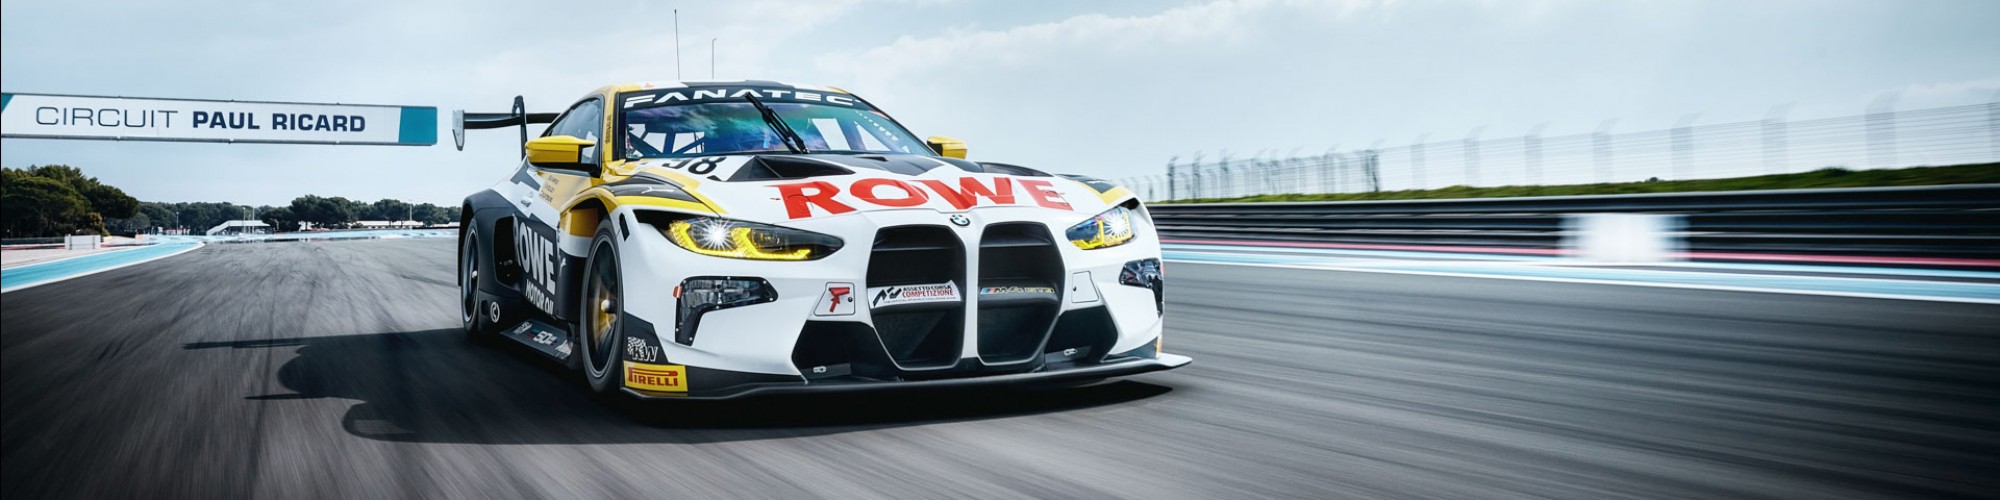 Motorsport Competence Group AG / Team ROWE RACING  cover image